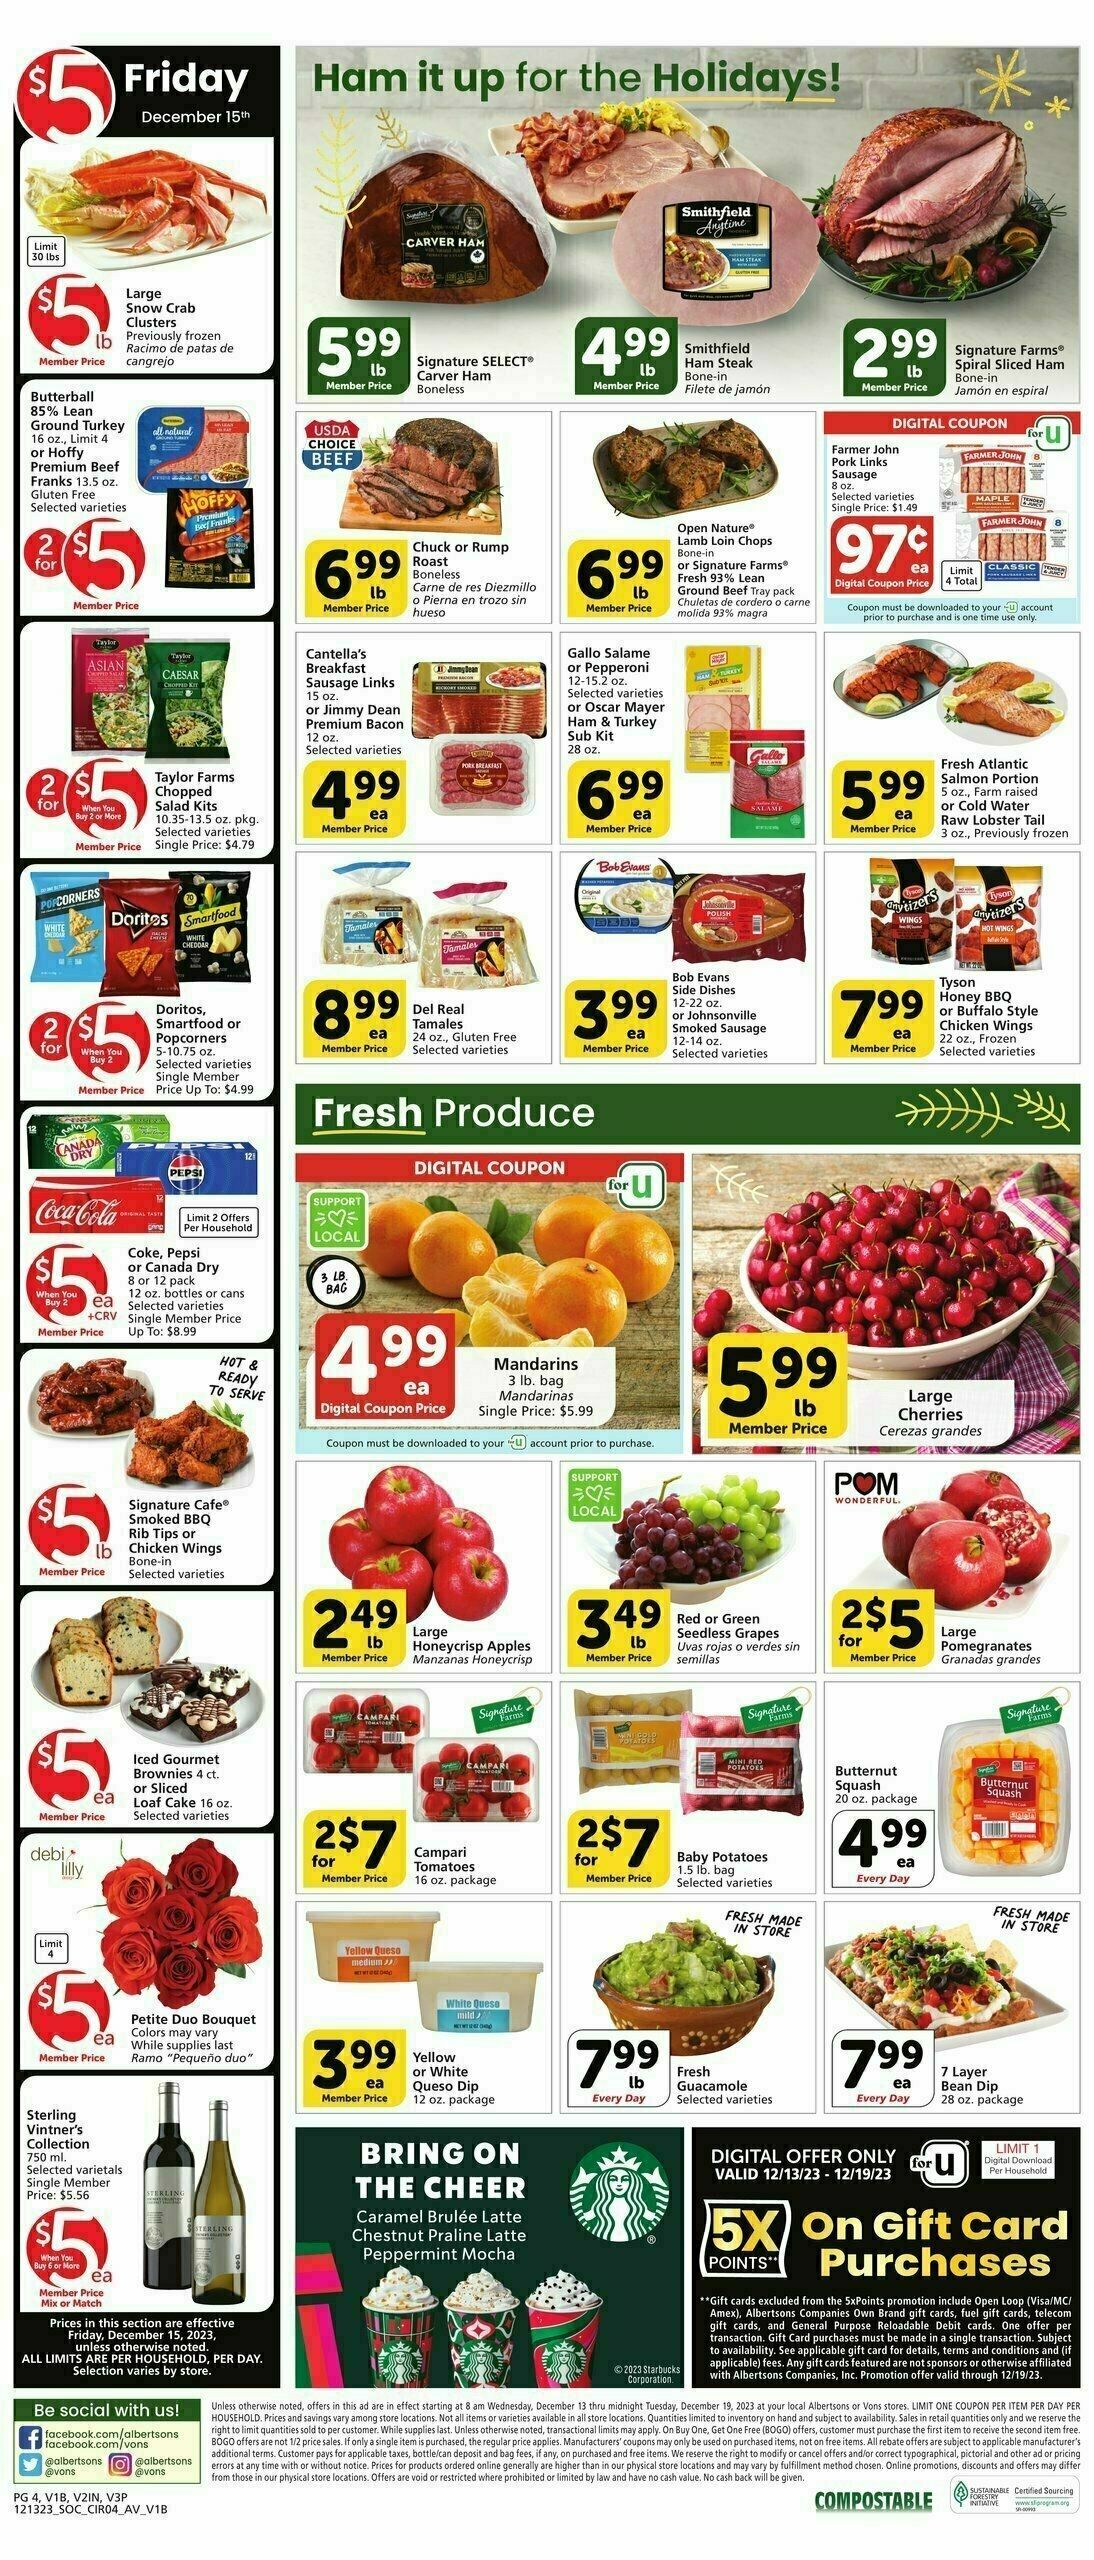 Vons Weekly Ad from December 13